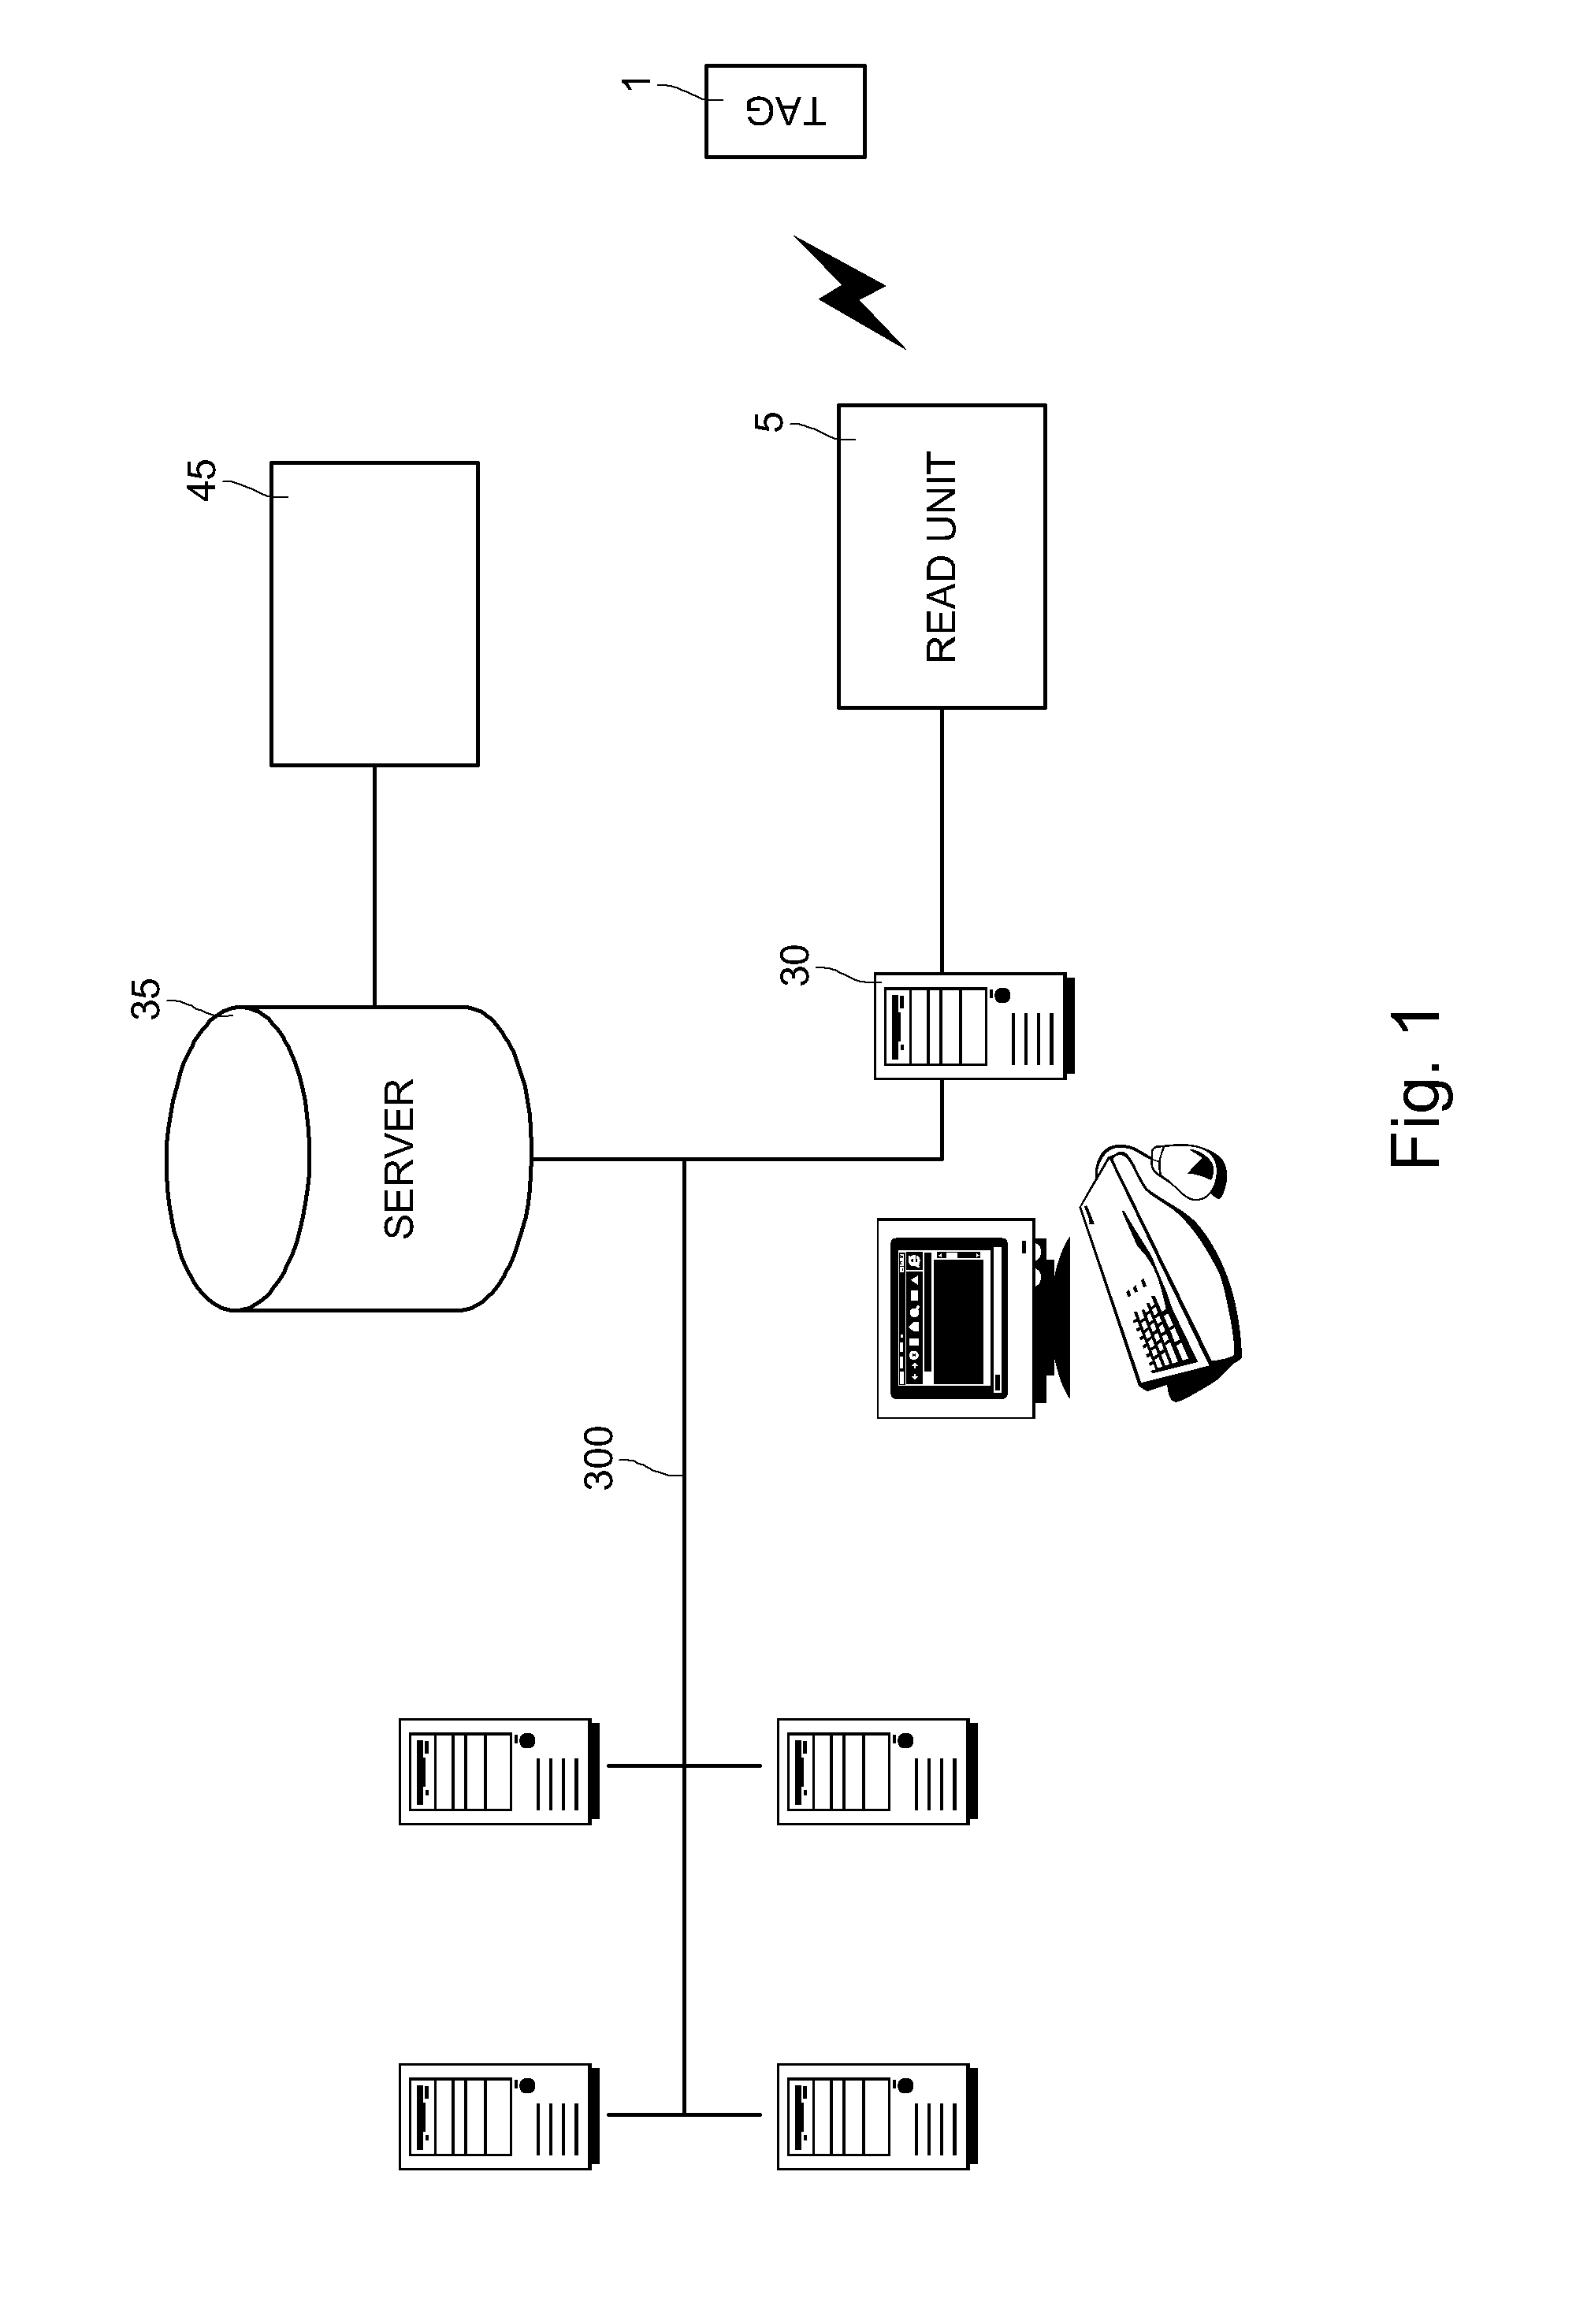 Method of authentication and secure exchange of data between a personalised chip and a dedicated server, and assembly for implementing the same